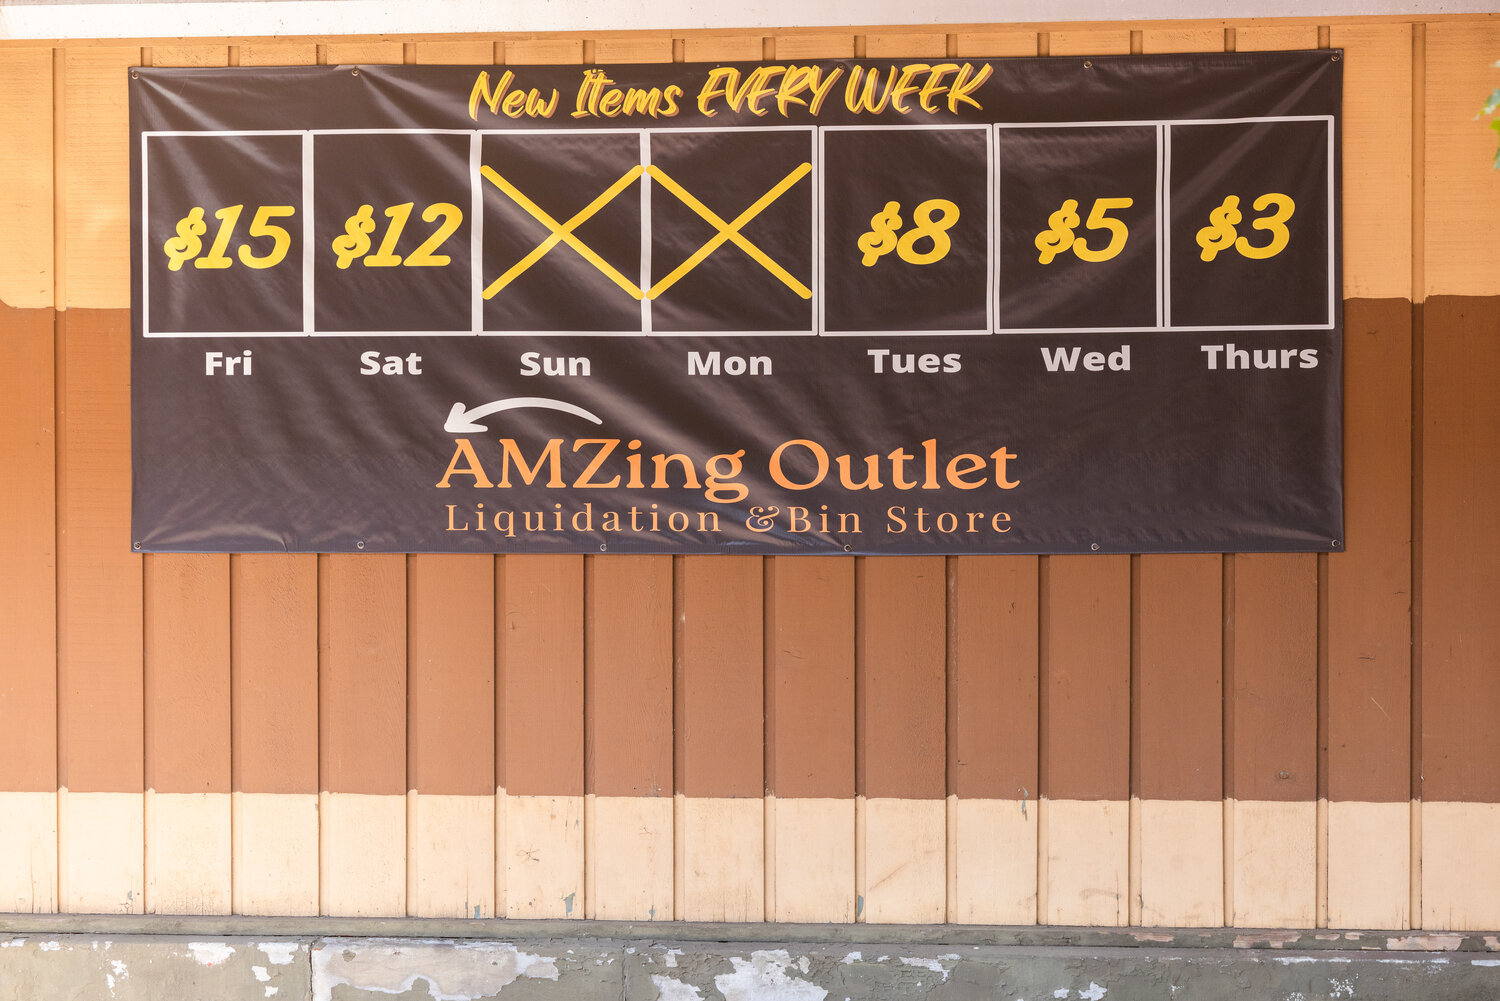 The AMZing Outlet Liquidation & Bin Store is now open Tuesday through Saturday in downtown Centralia.